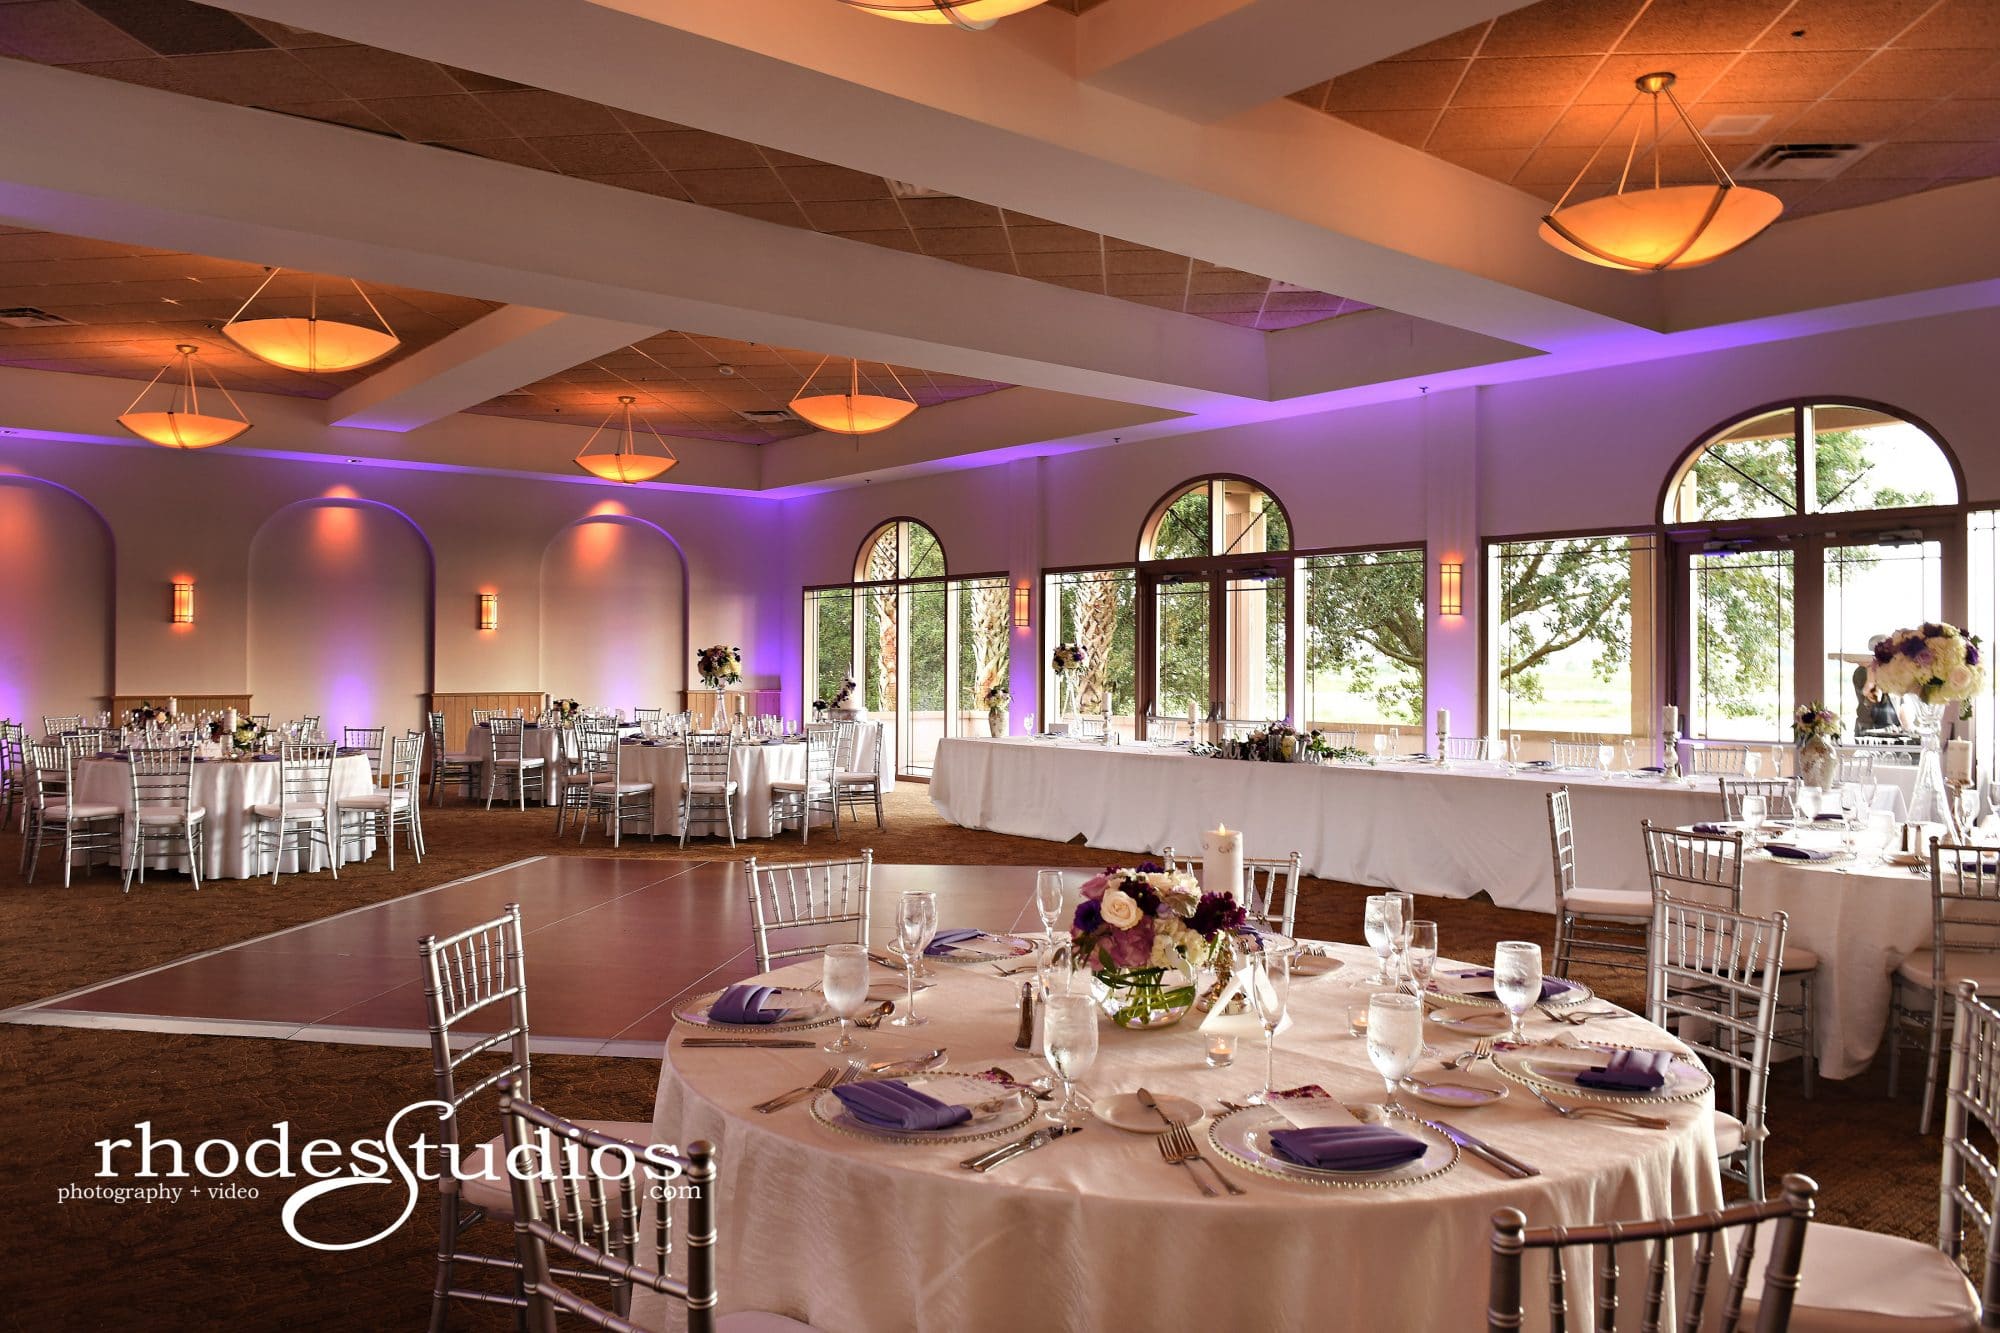 ChampionsGate Golf Club - large reception hall to seat any party